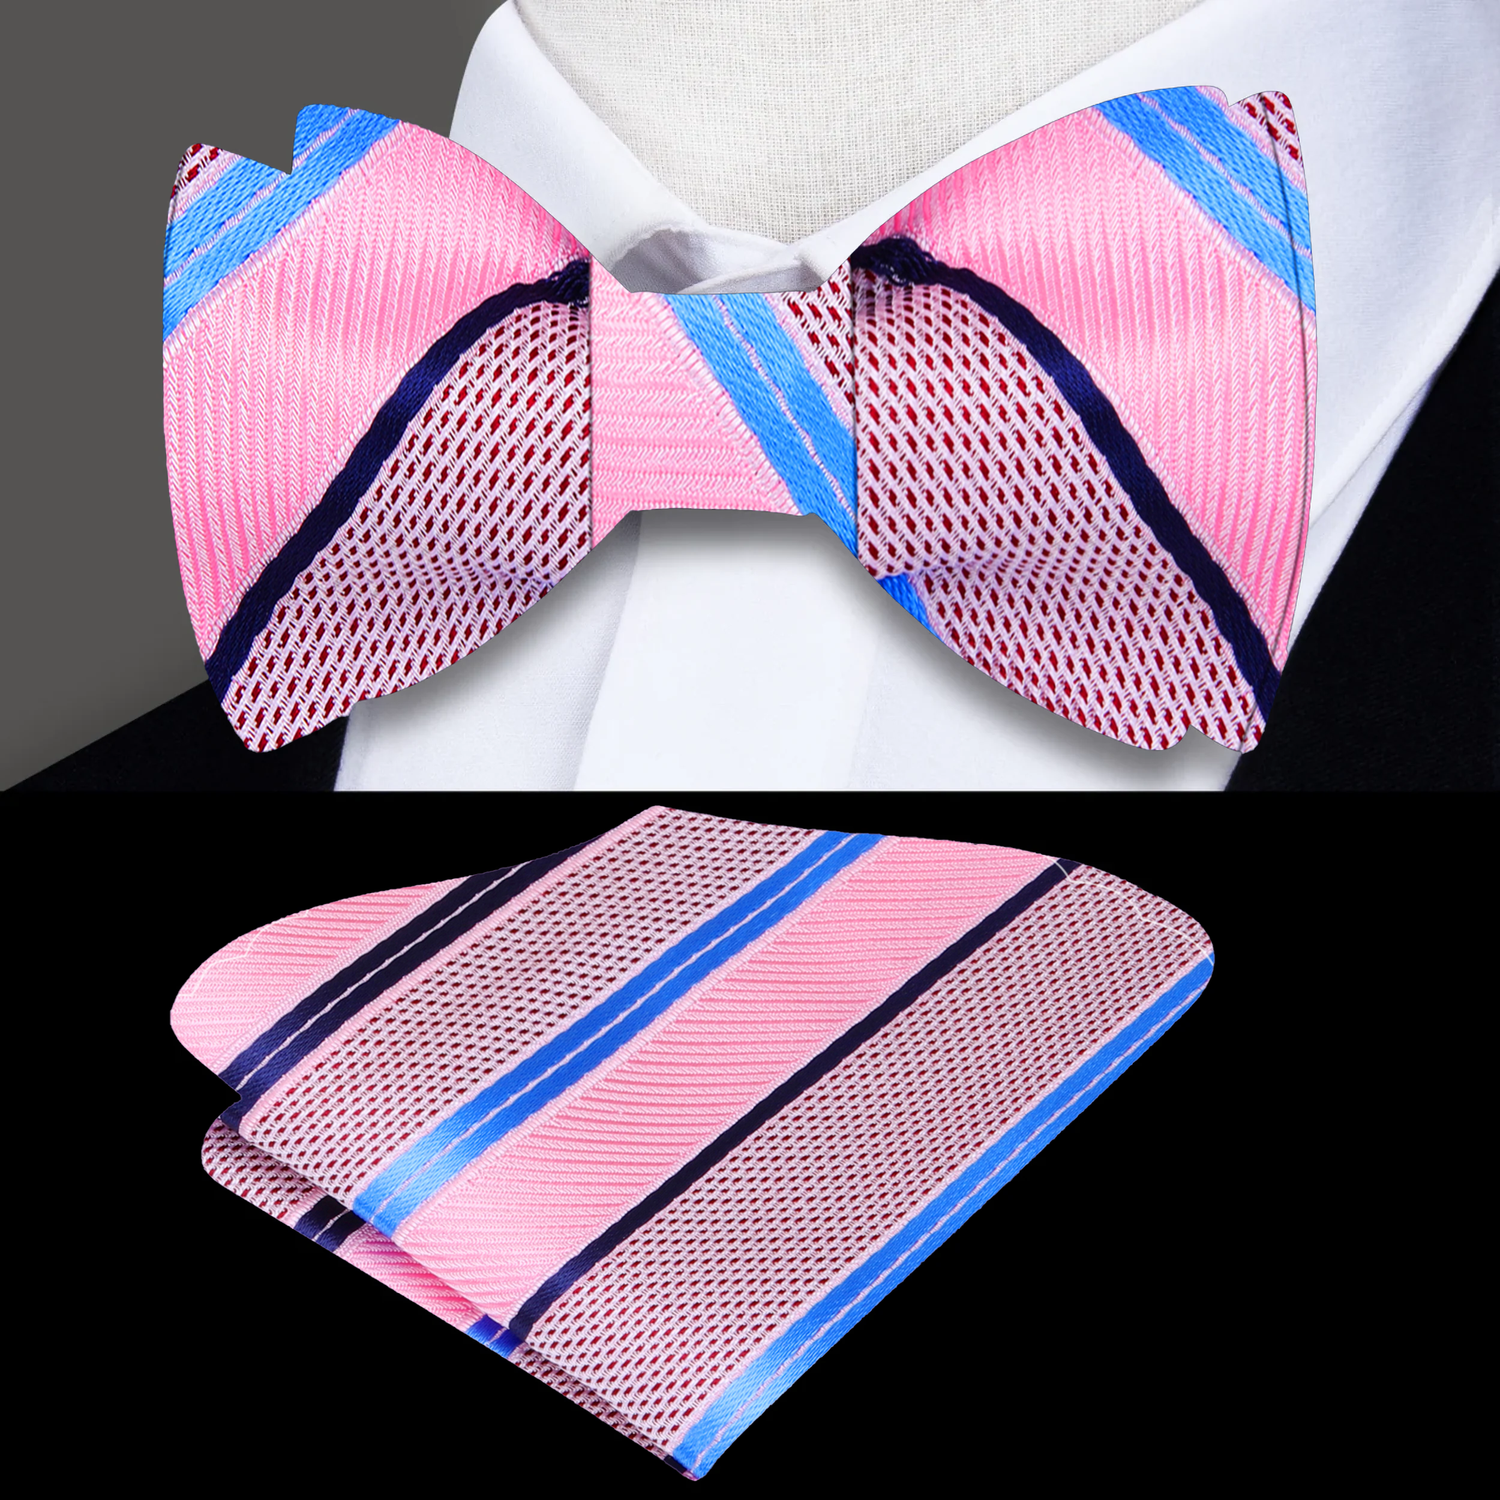 Main View: Pink, blue stripe bow tie and pocket square.